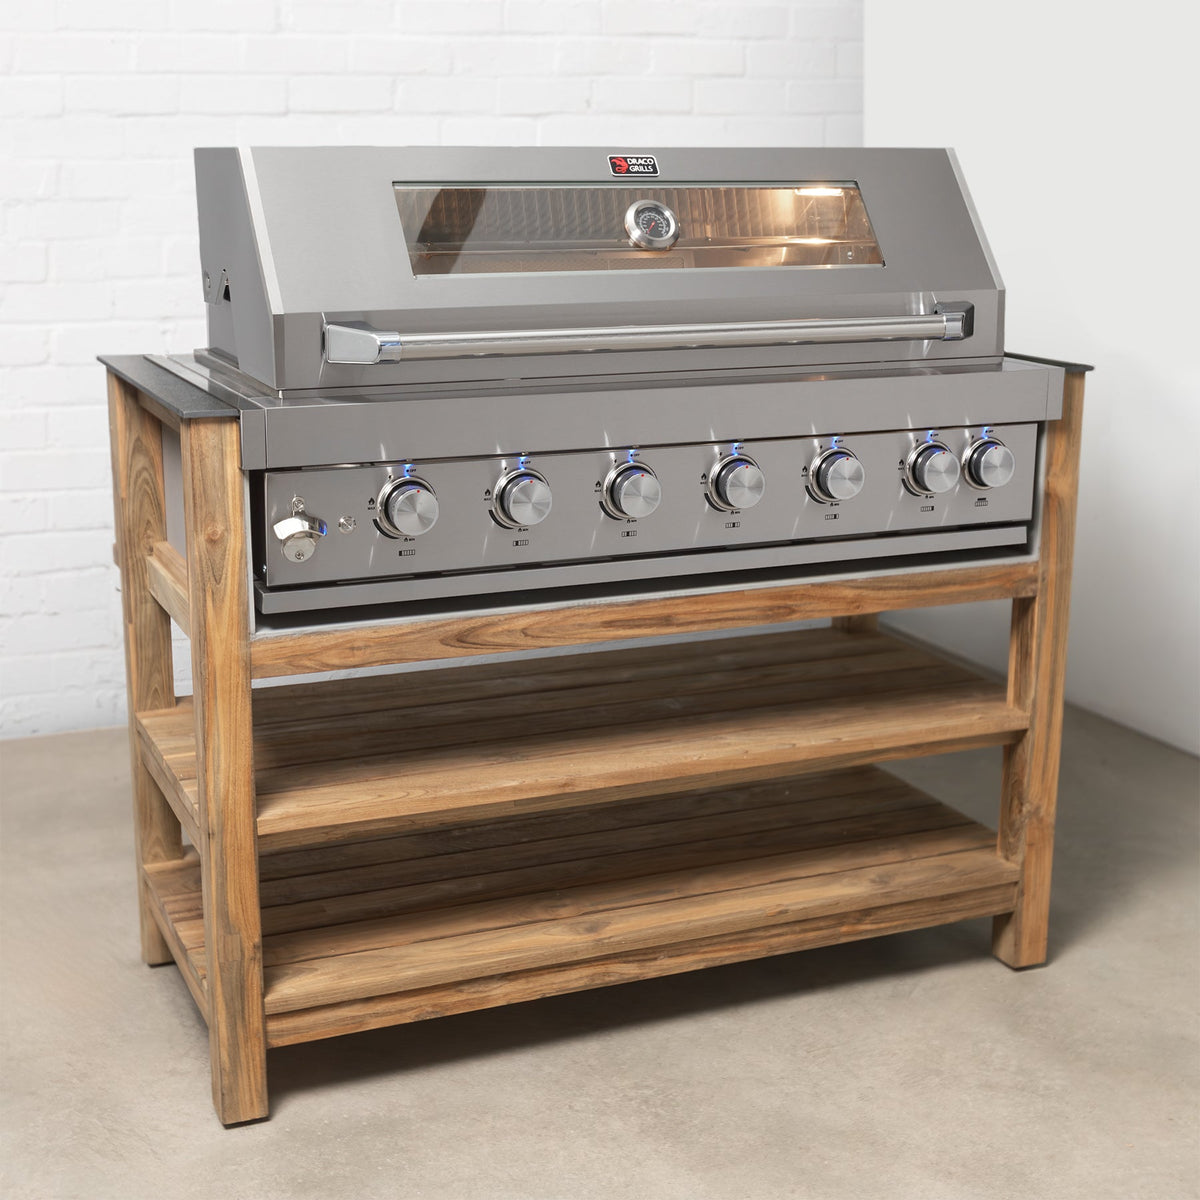 Draco Grills Teak 6 Burner Outdoor Kitchen with Modular Single Cupboard and Triple Drawer Unit